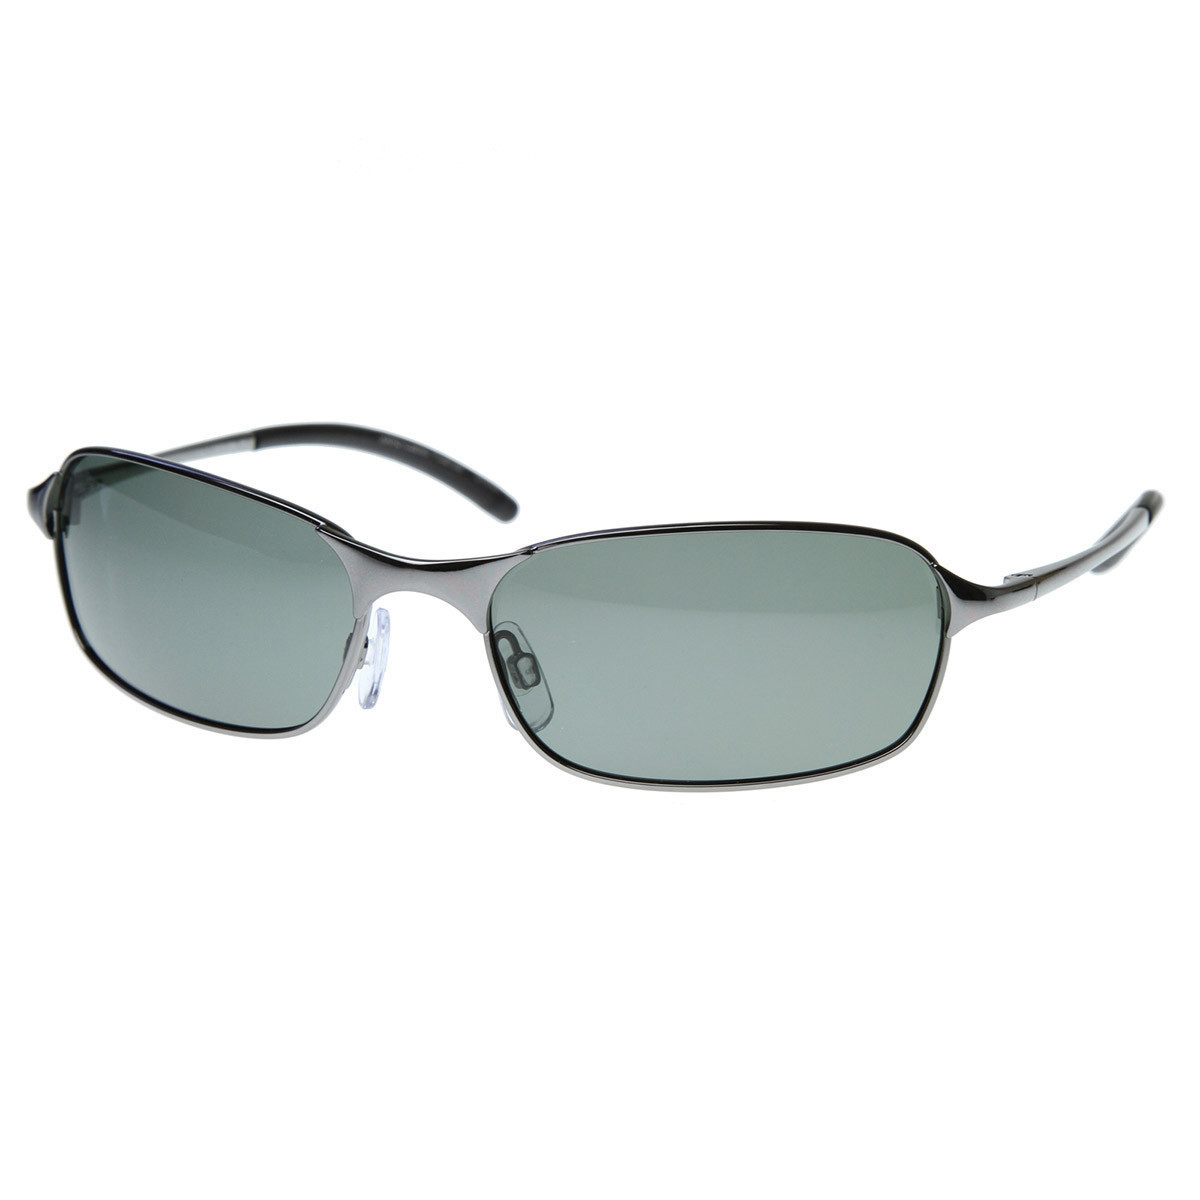 Polarized Thin Wire Frame Metal Sunglasses - 8321 - Silver